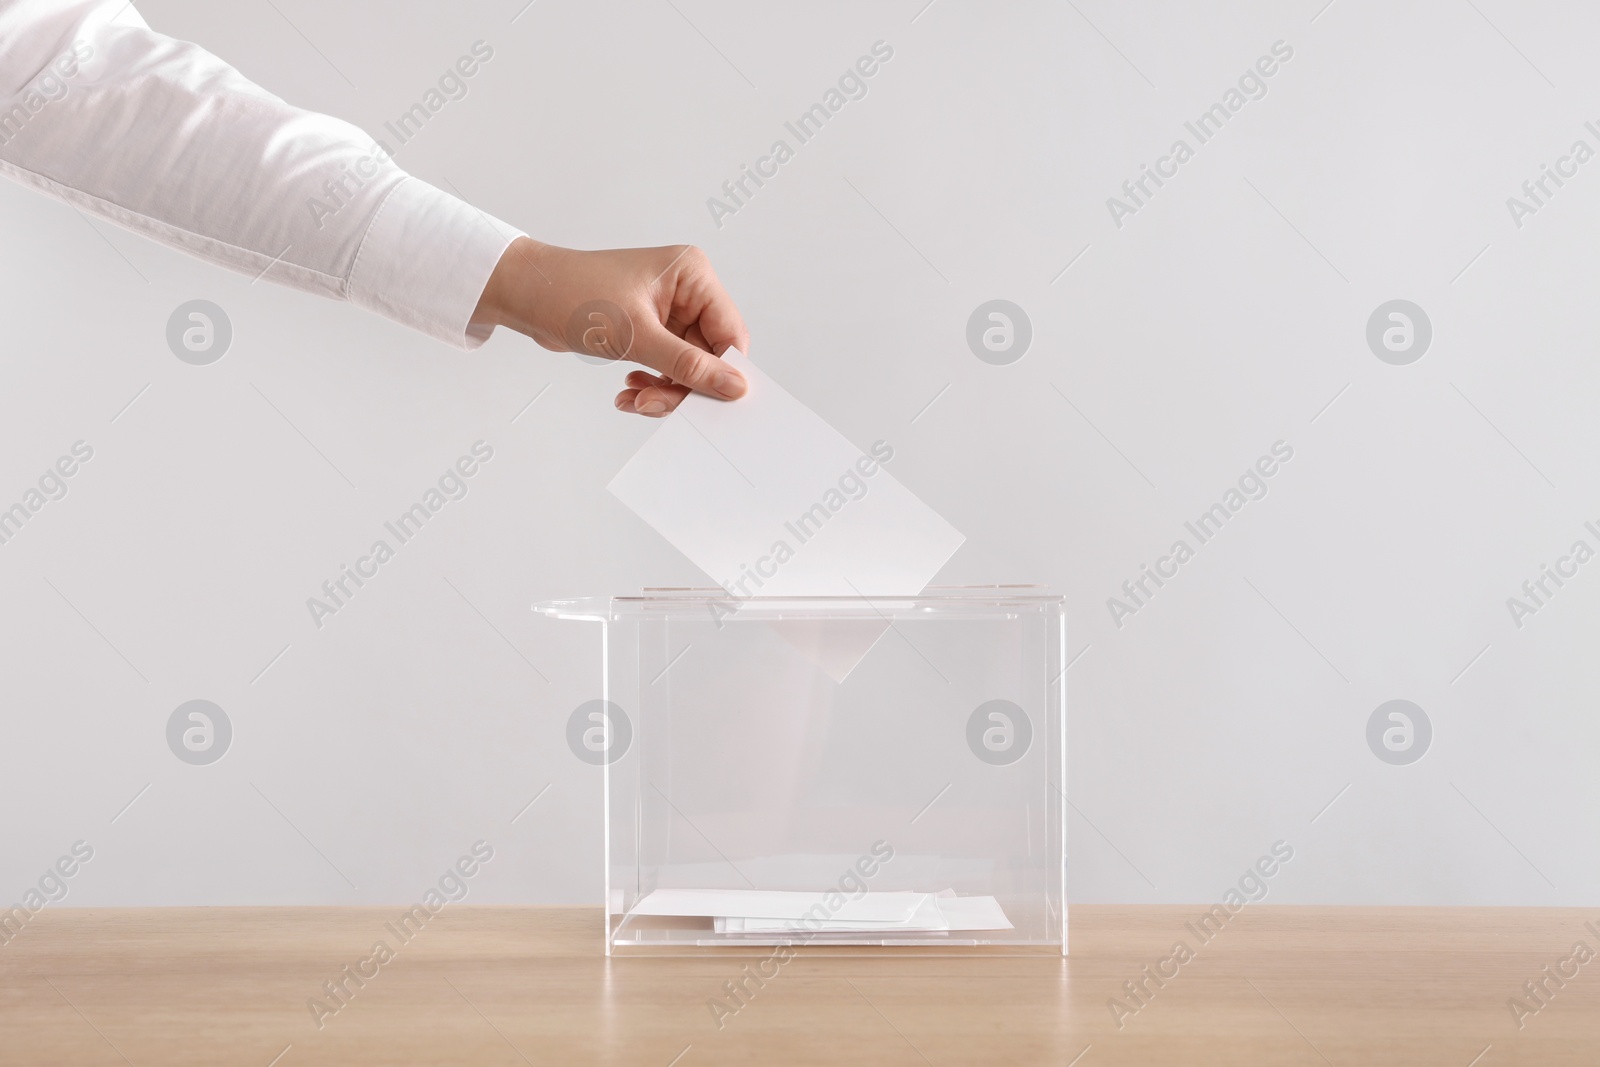 Photo of Woman putting her vote into ballot box on wooden table against light grey background, closeup